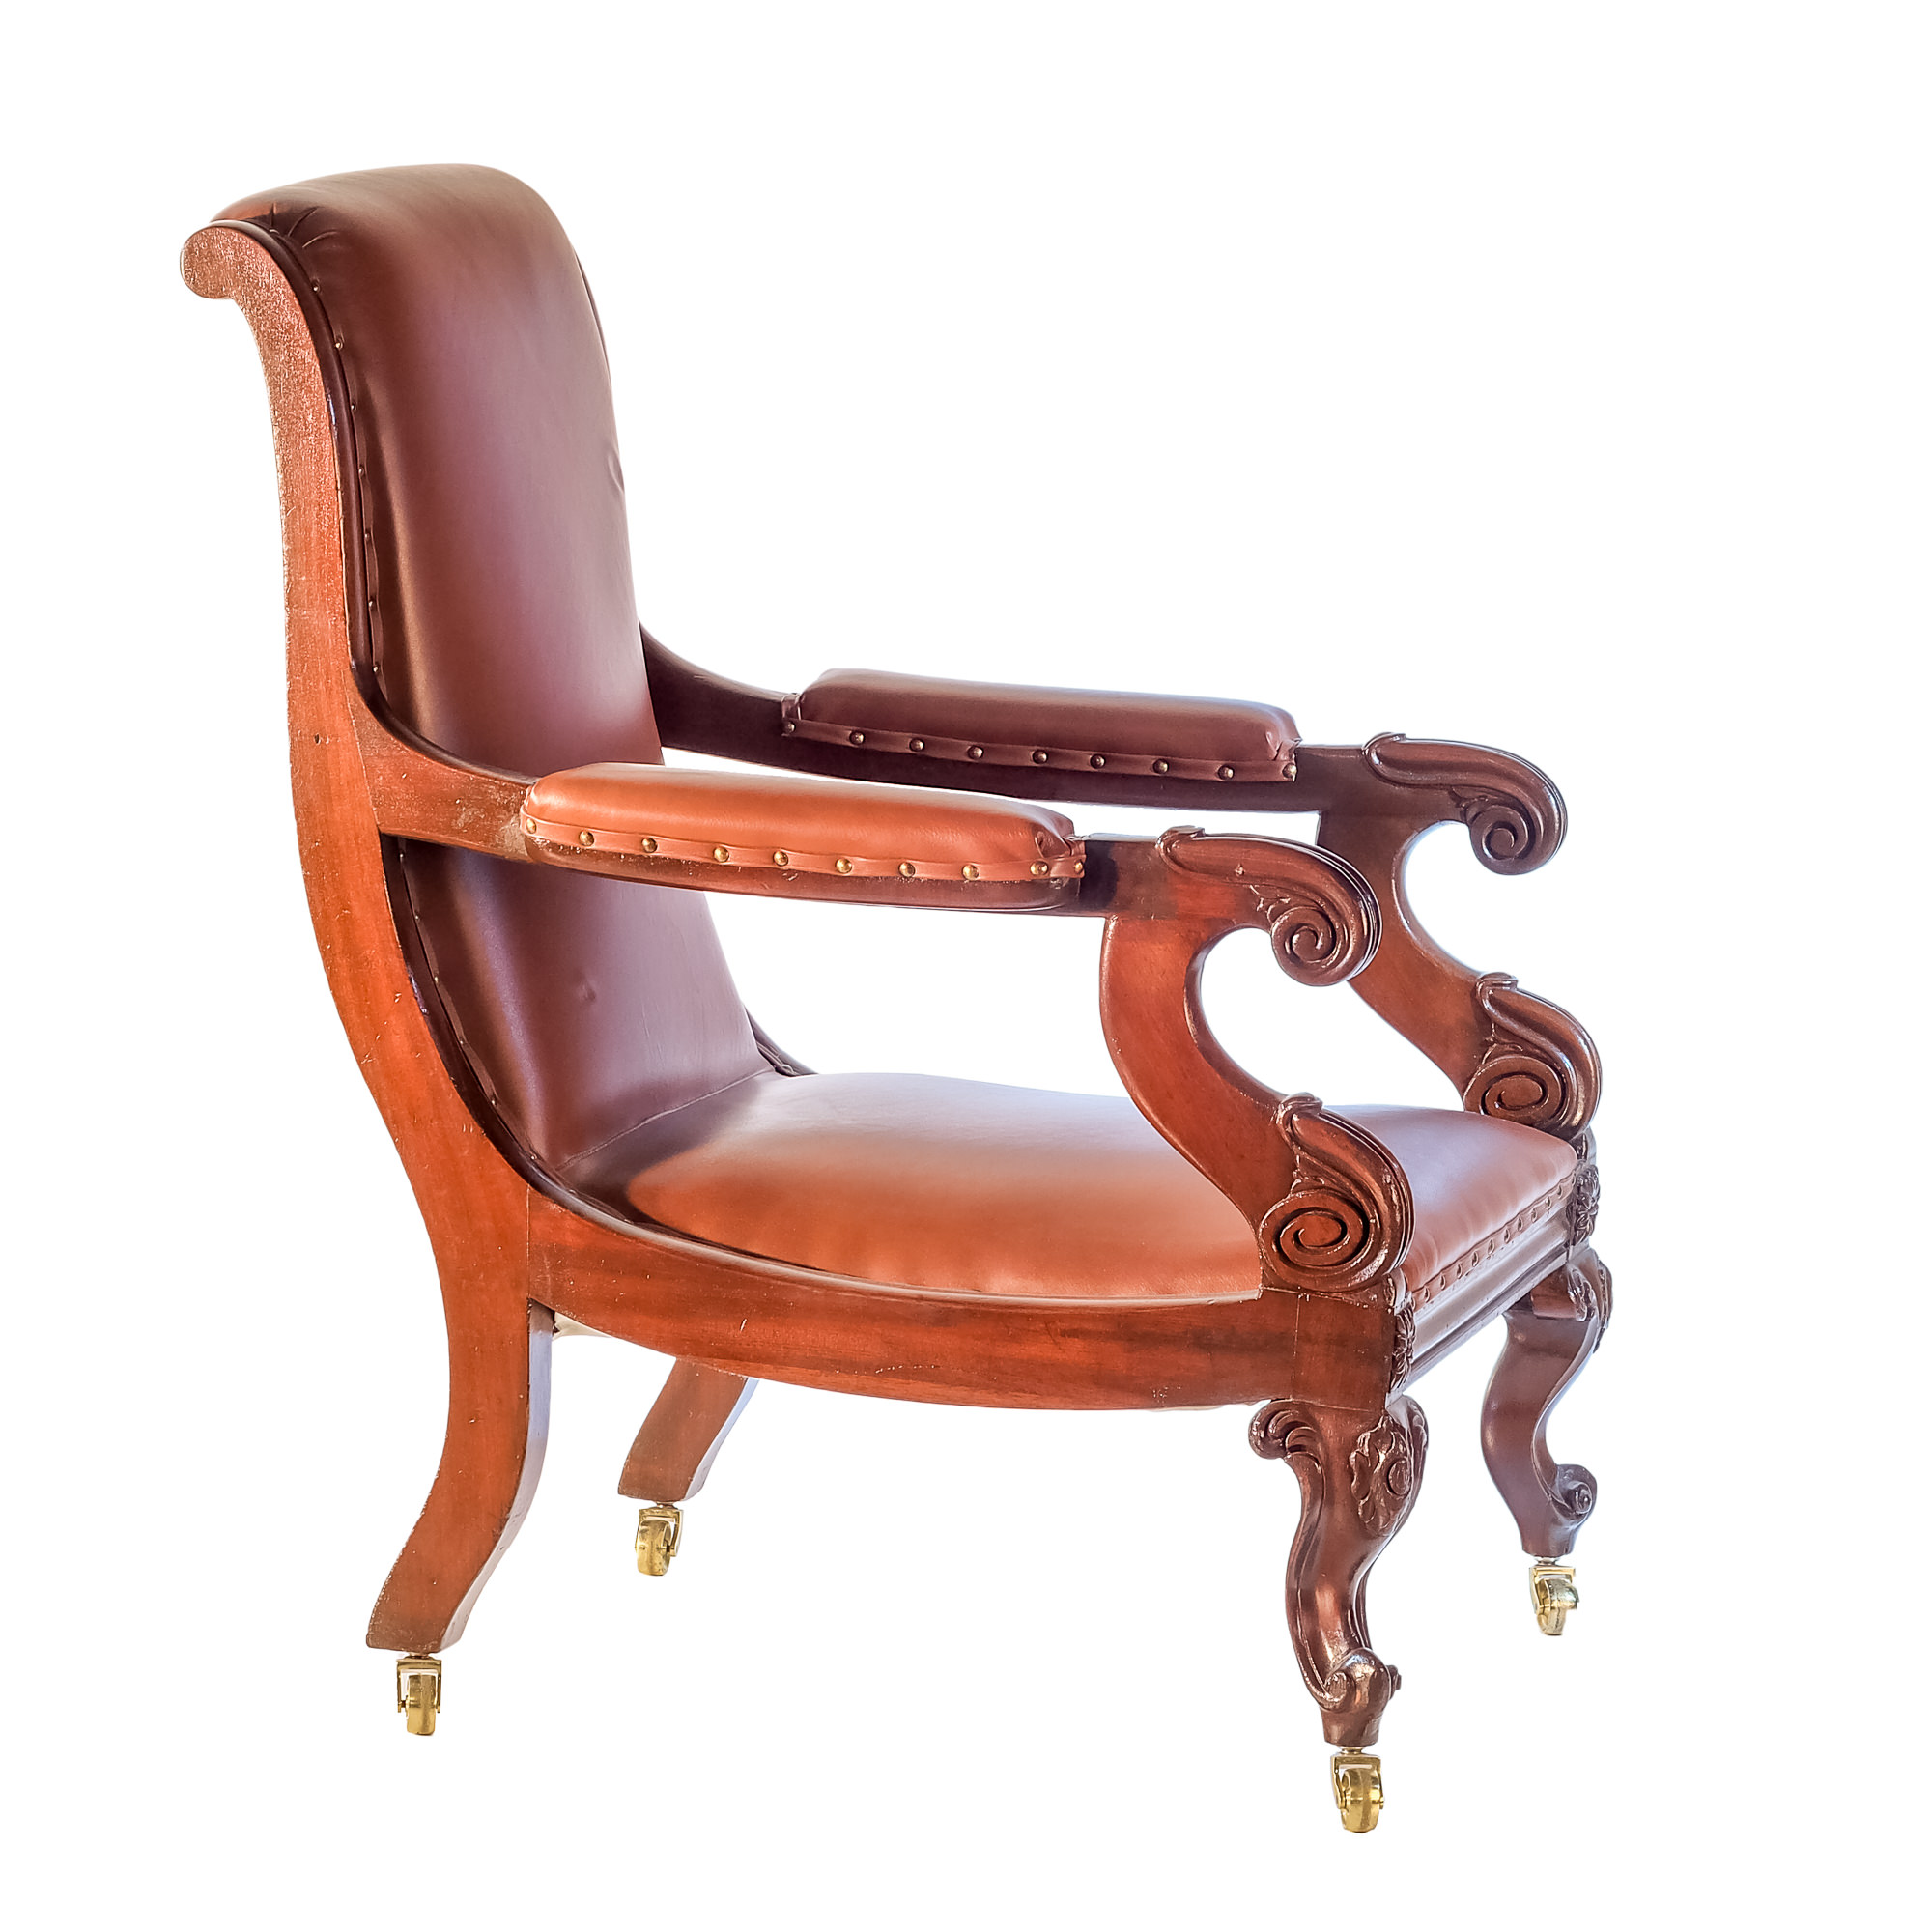 'Early Victorian Mahogany Reading Chair with Well Carved Arms and Forelegs Circa 1840'